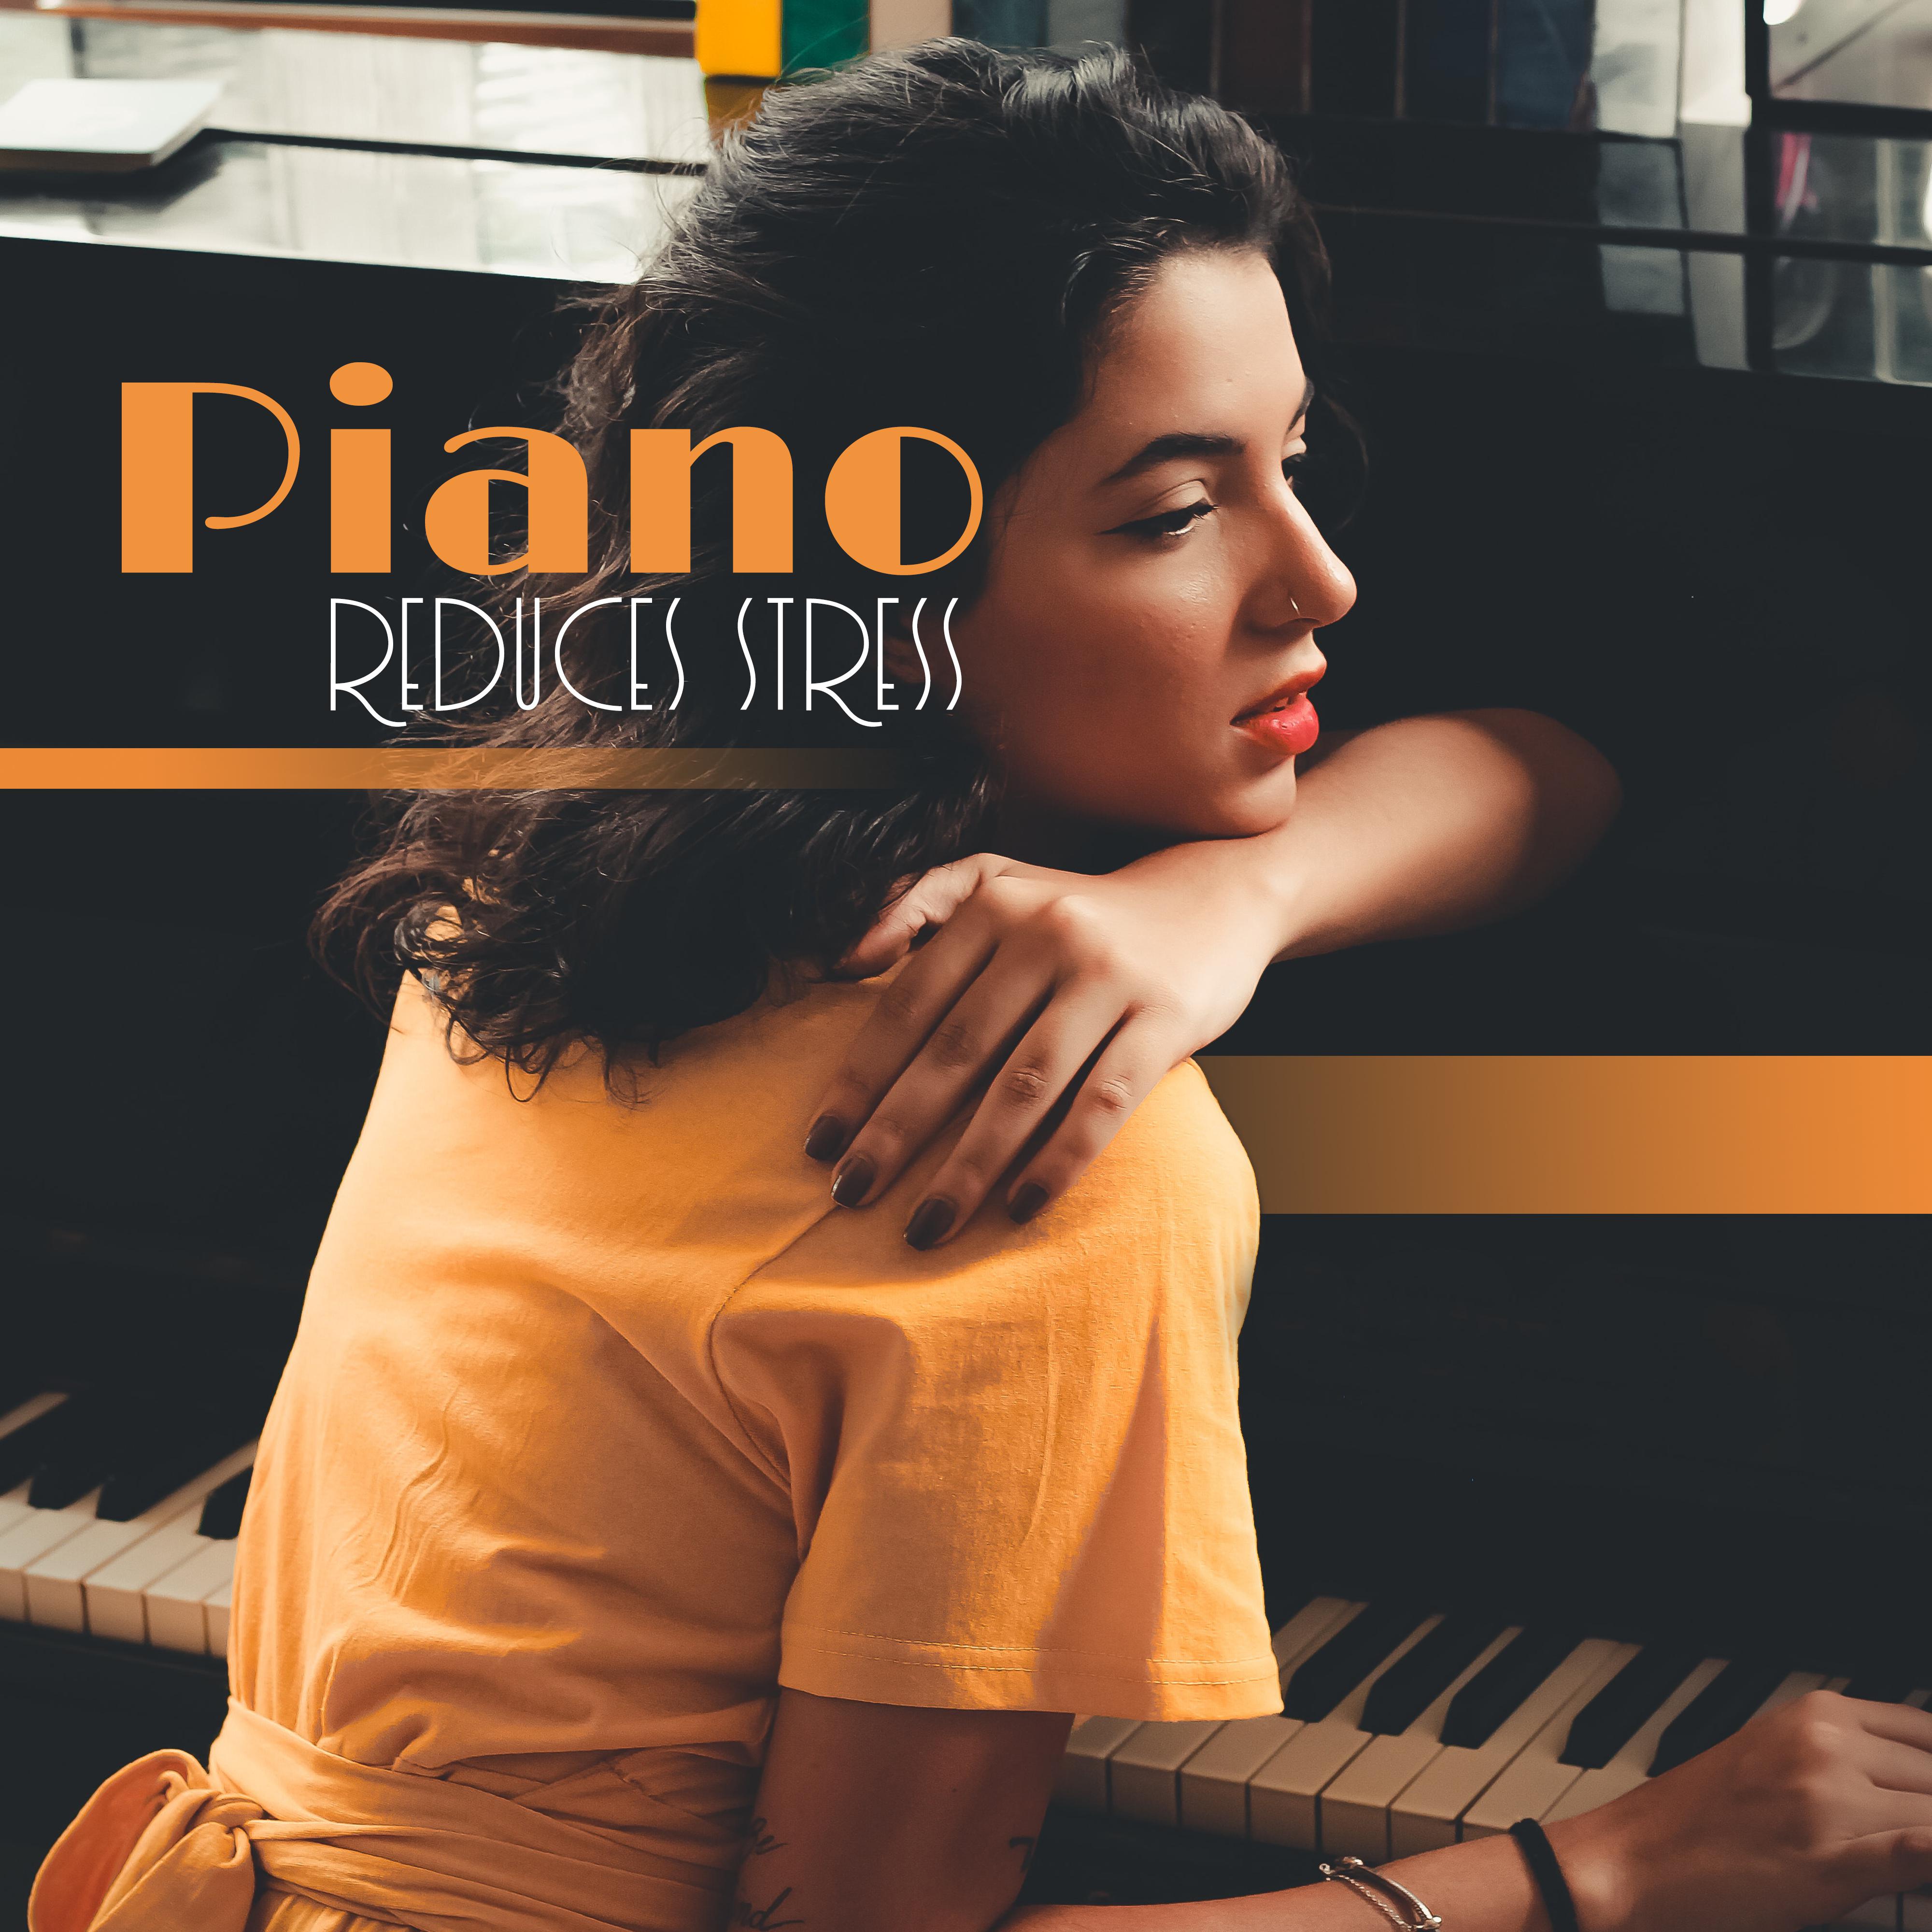 Piano Reduces Stress: Instrumental Jazz for Relaxation, Sleep, Restaurant, Fresh Smooth Jazz, Evening Jazz Relaxation, Piano Music to Calm Down